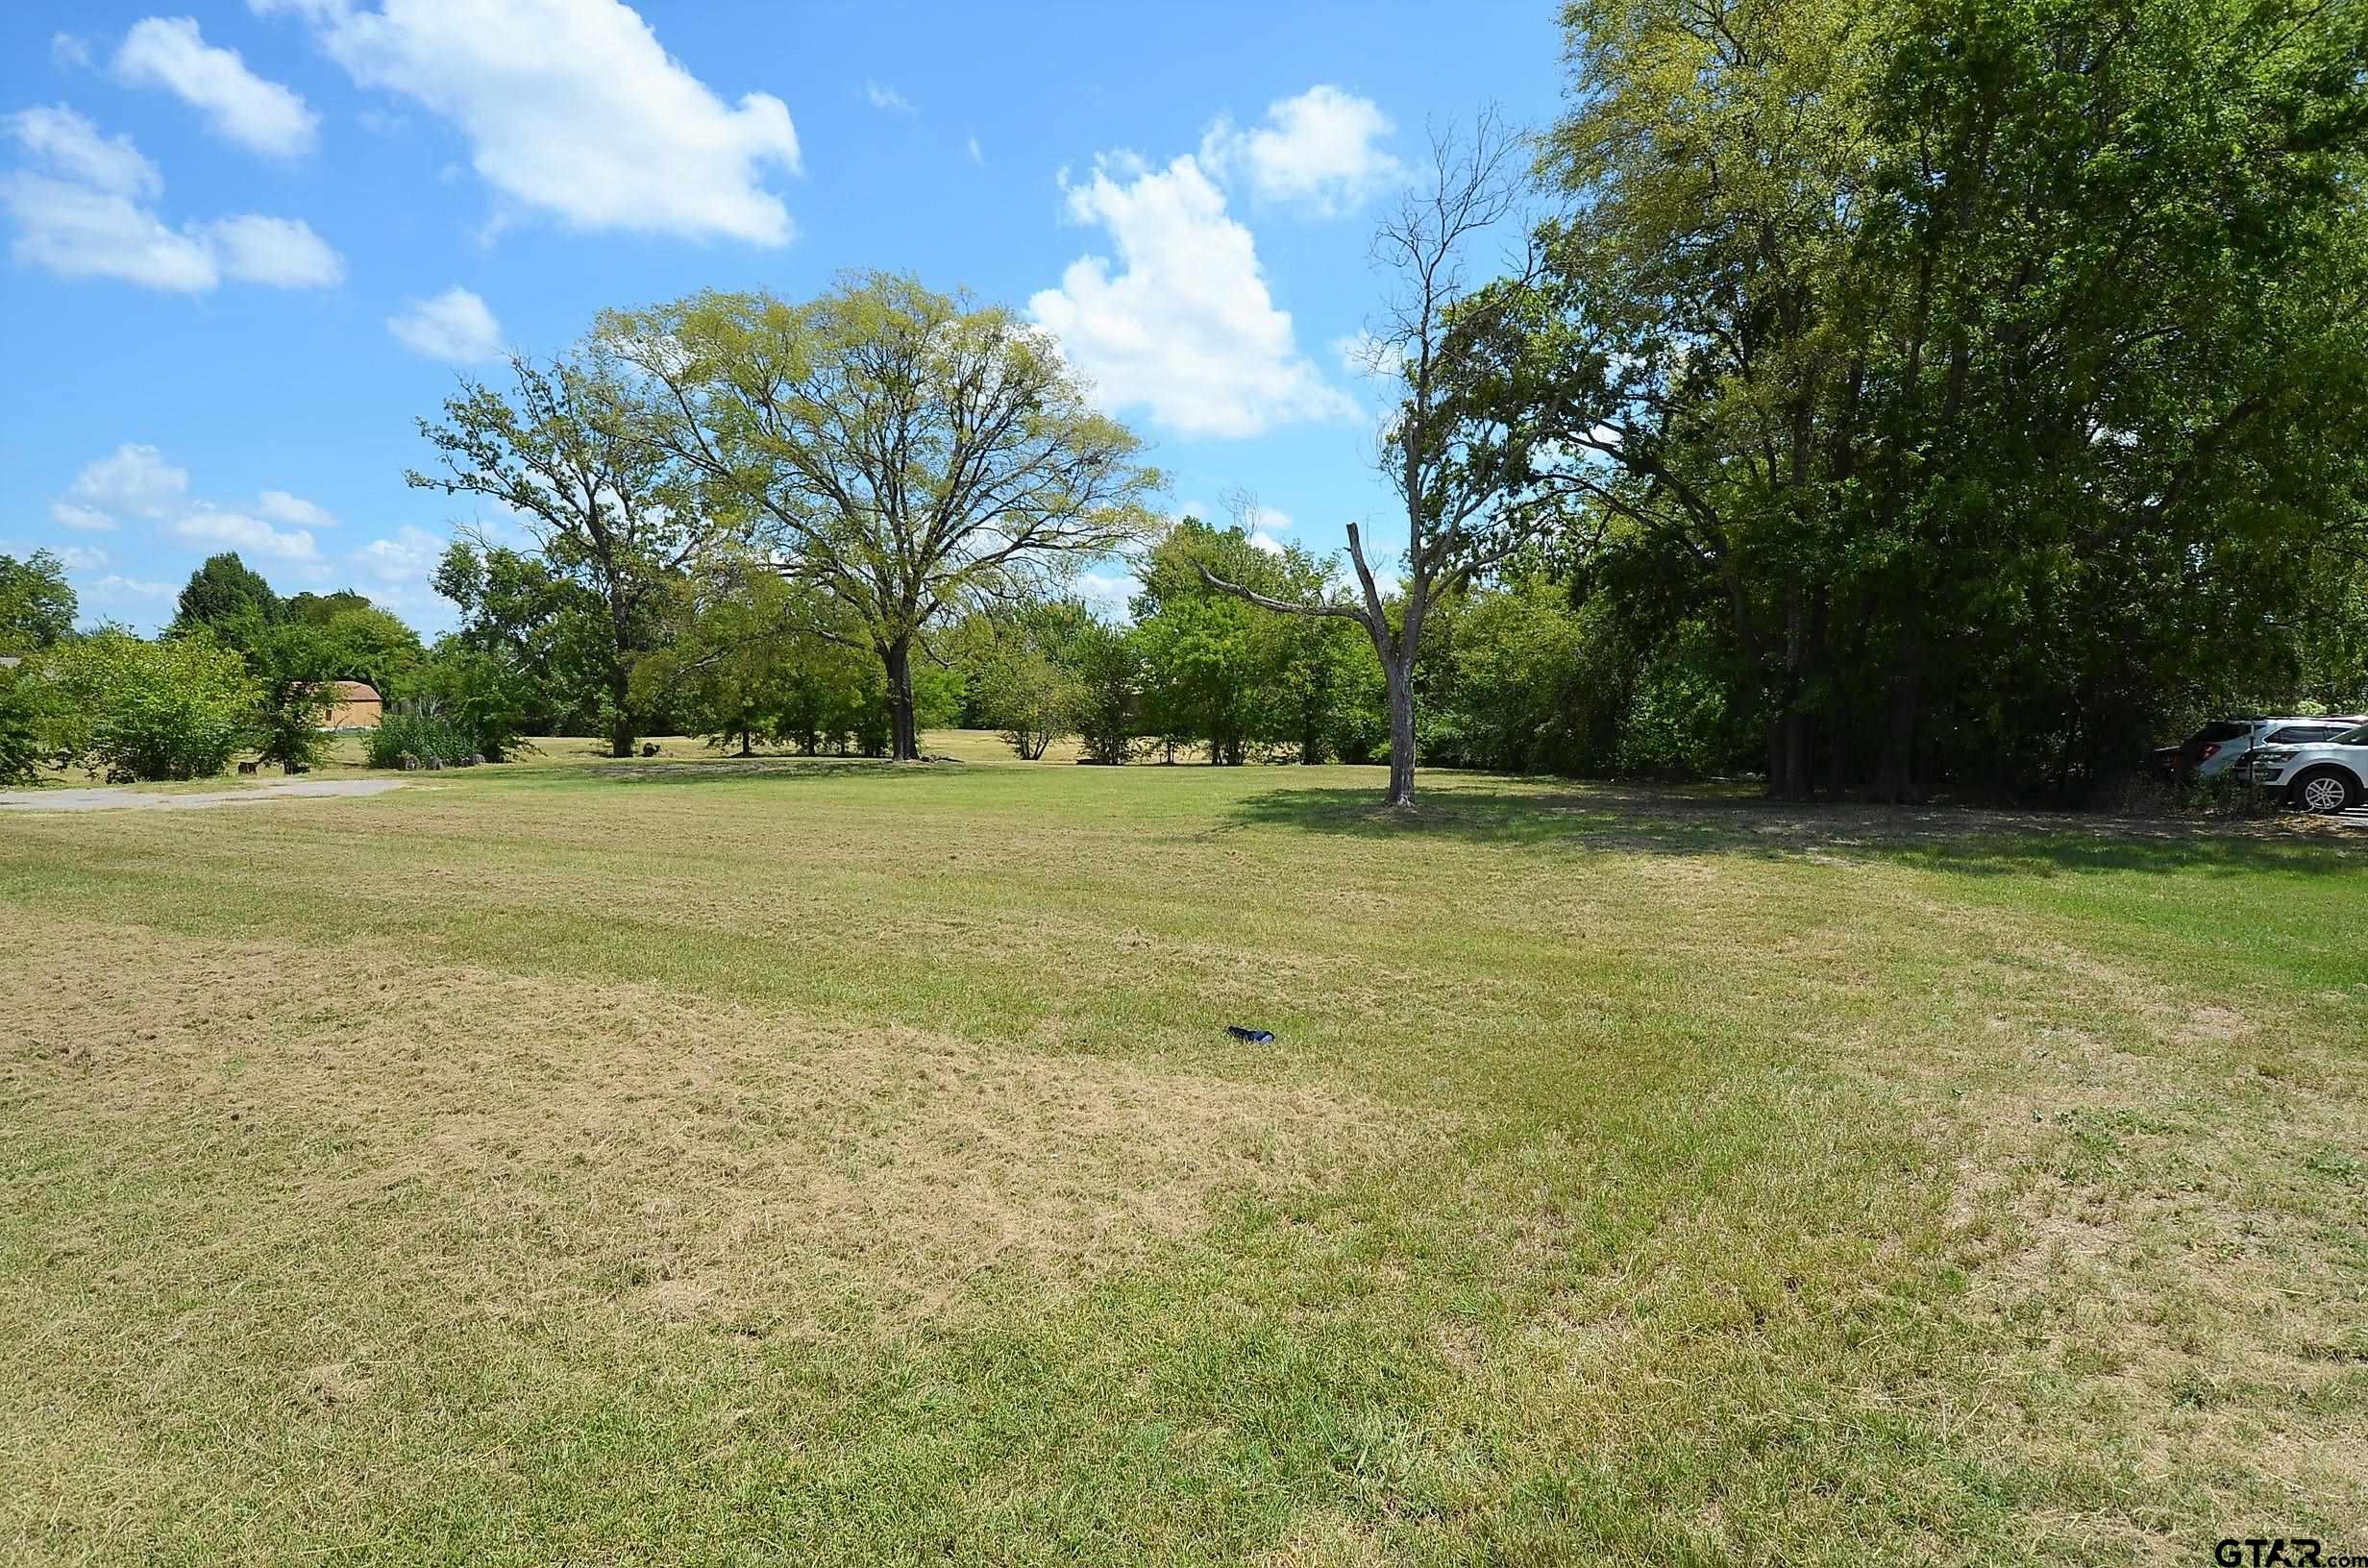 Spacious 1.8+ acre lot with development potential.